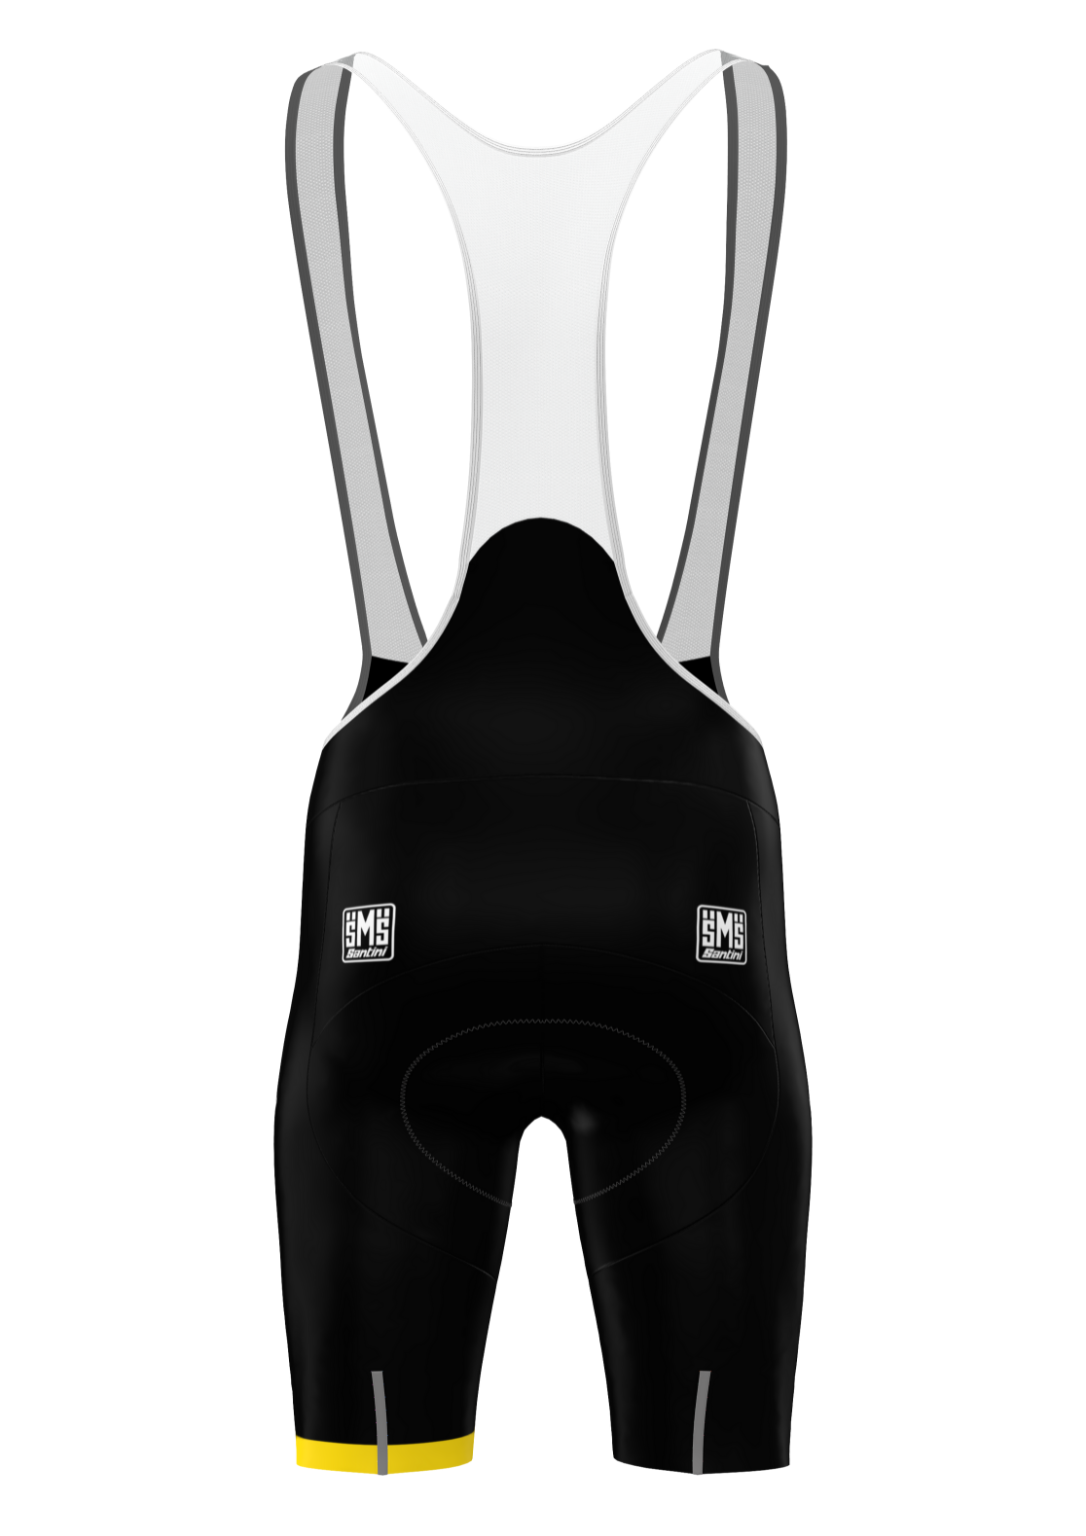 ROUVY Bib shorts - Women's (2022 collection)